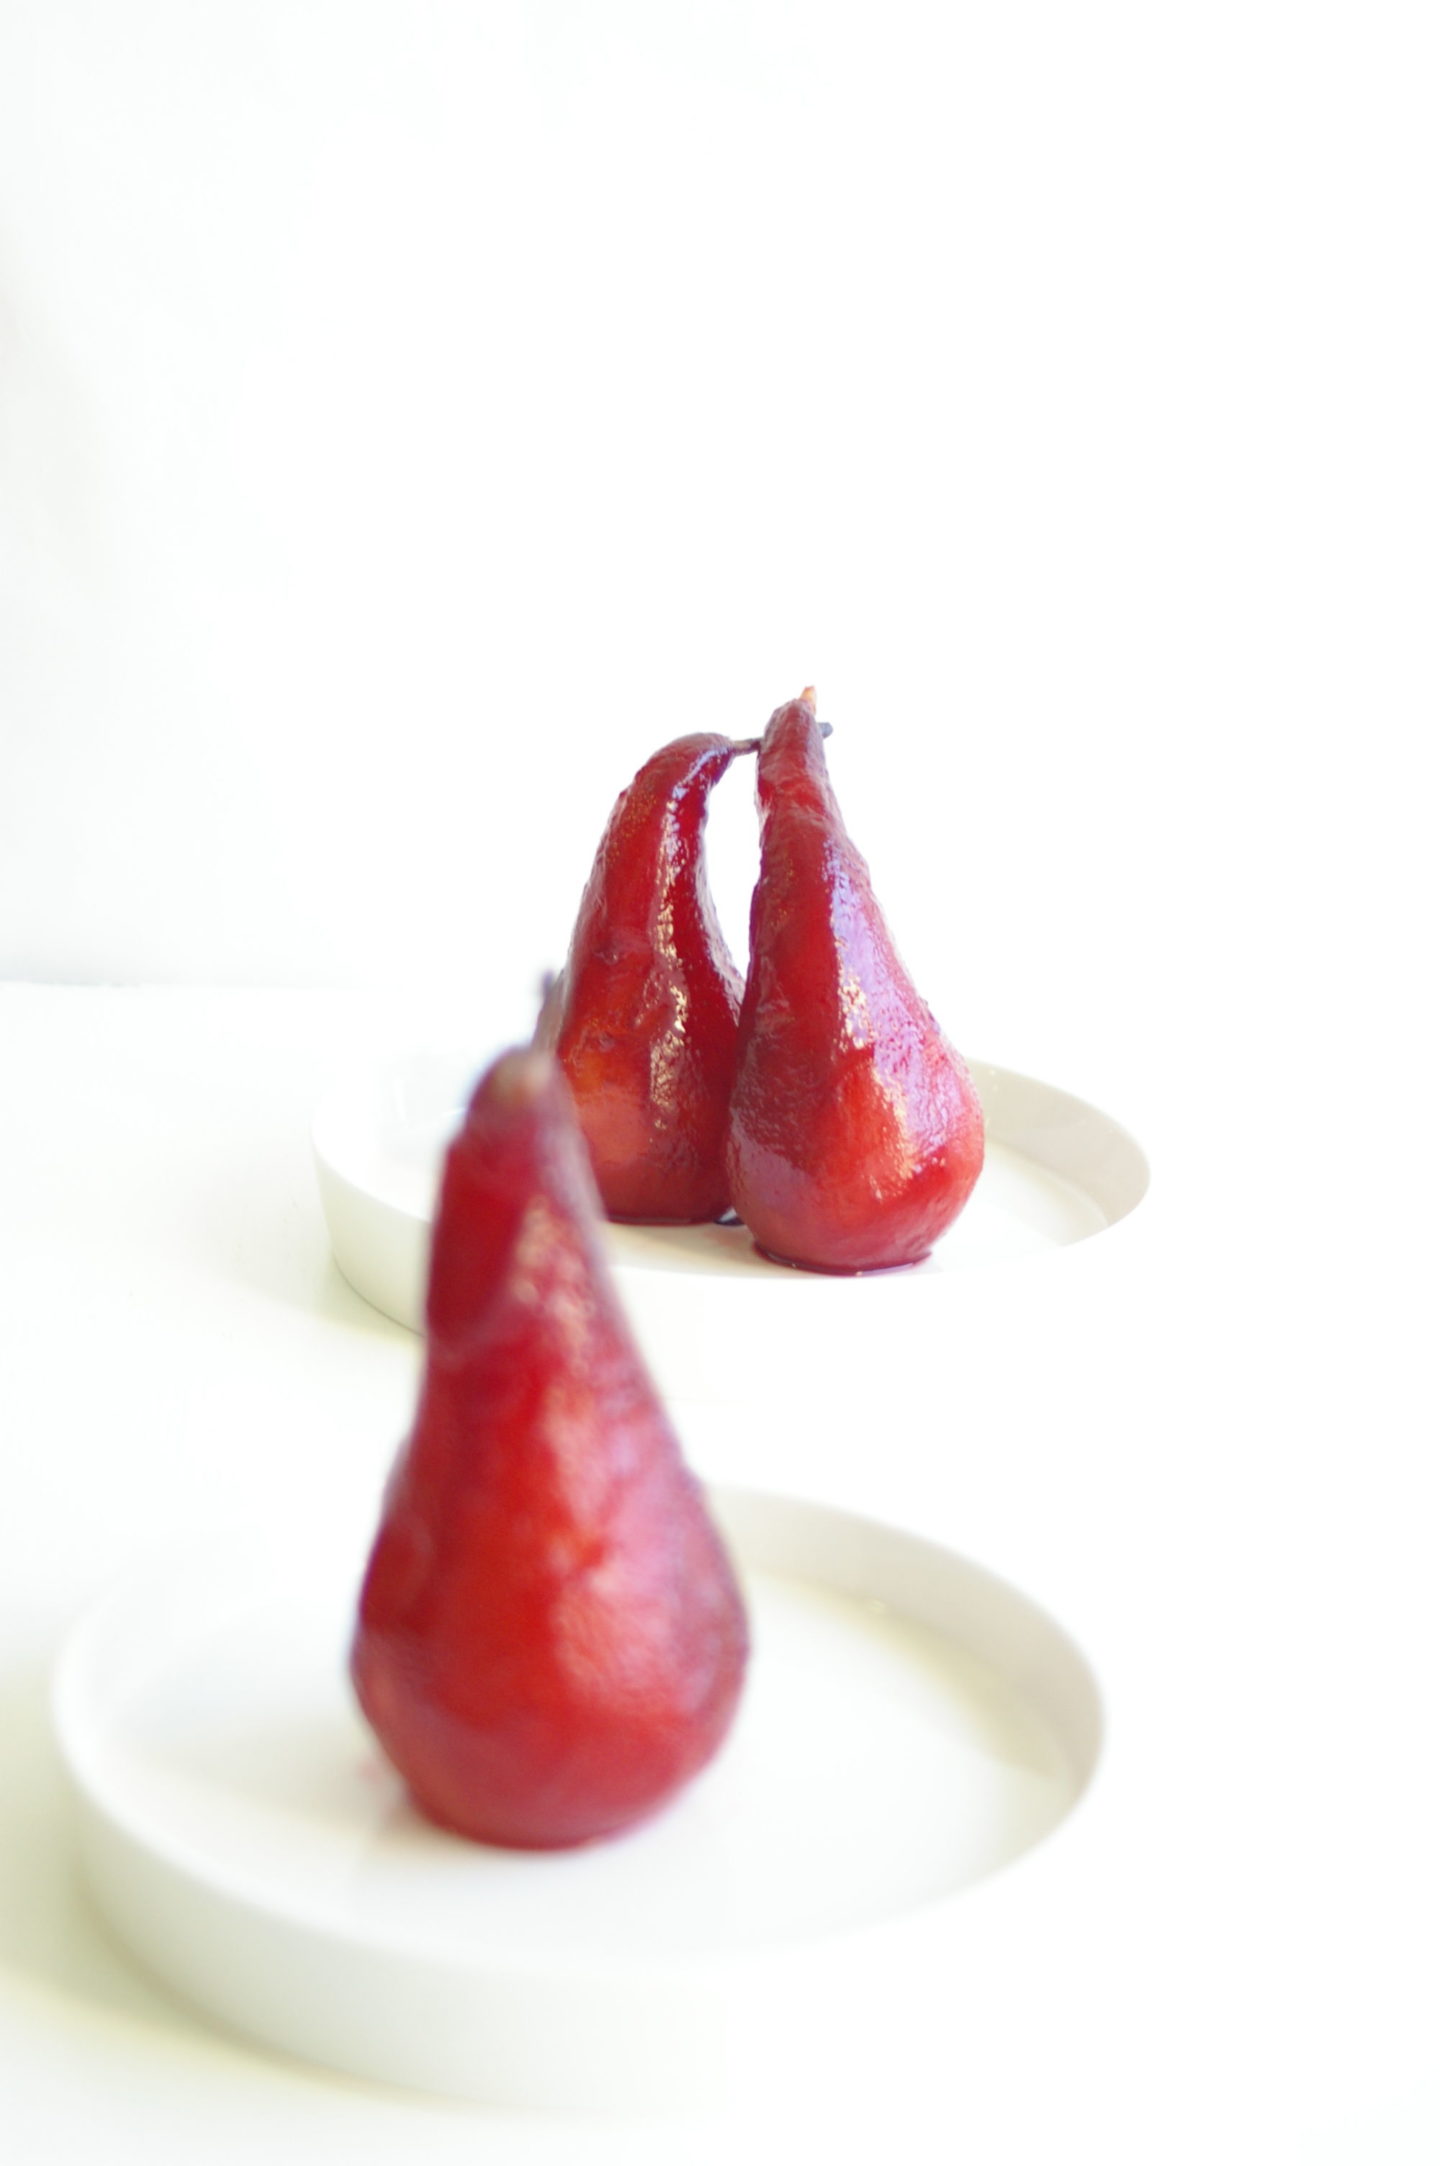 Poire au bissap, pears hibiscus flower infused